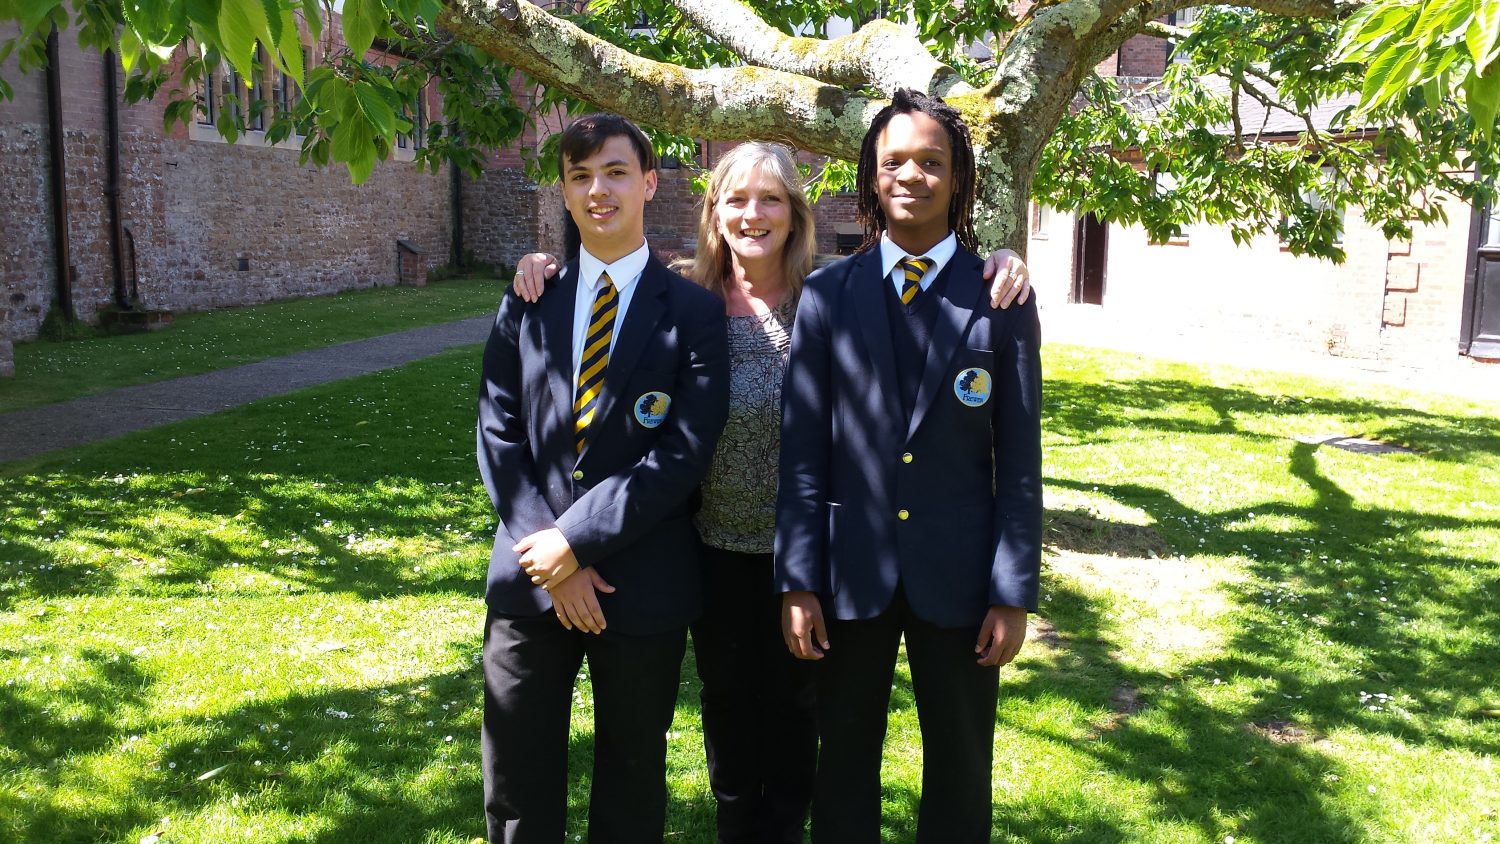 Head of Boarding Sarah Medcraft, with boarders